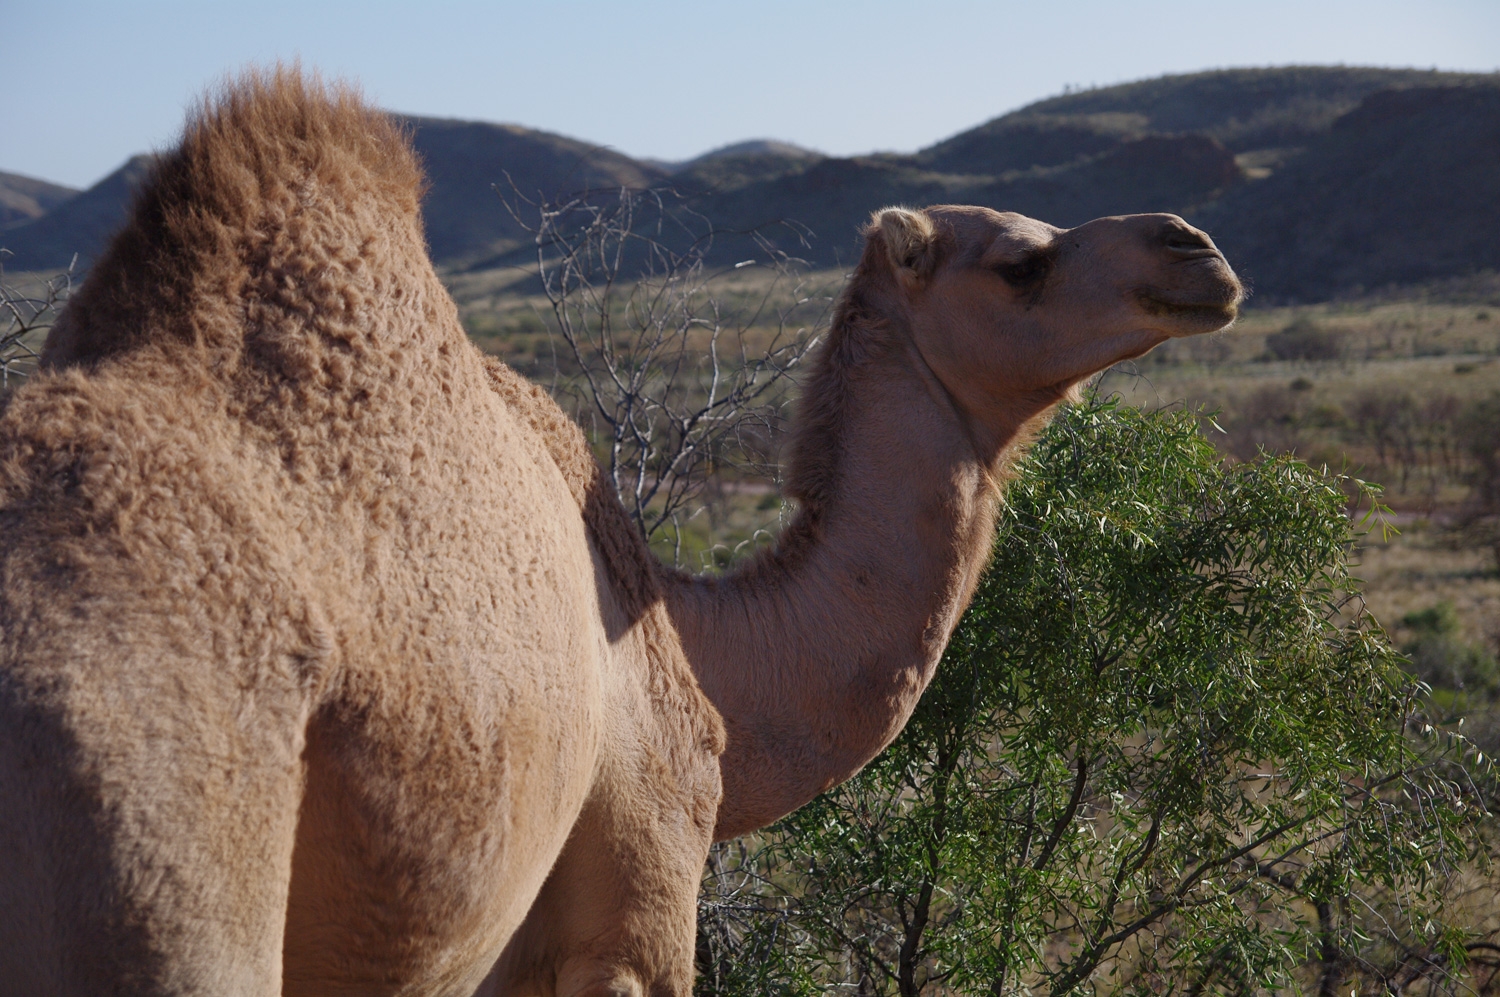 Across The Outback On A Camel